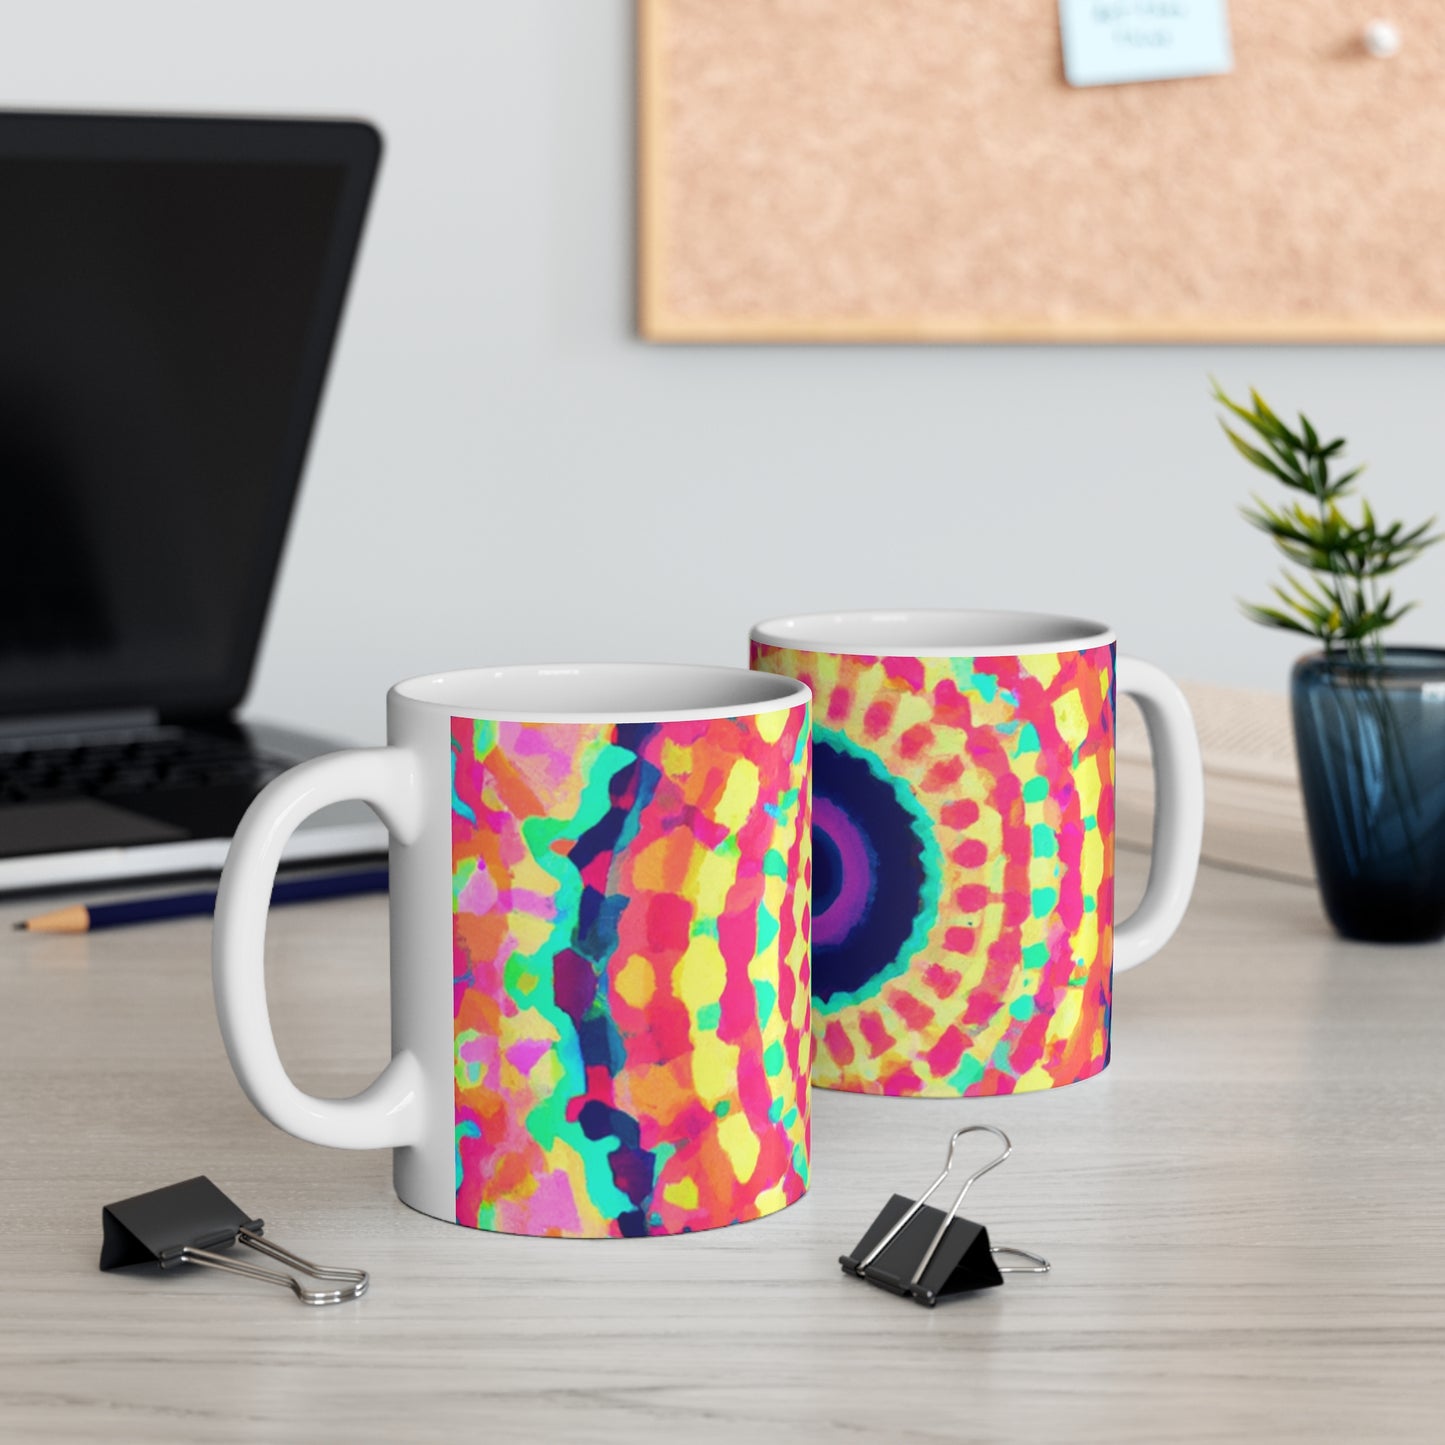 Brewmeister Freddie's Coffee - Psychedelic Coffee Cup Mug 11 Ounce